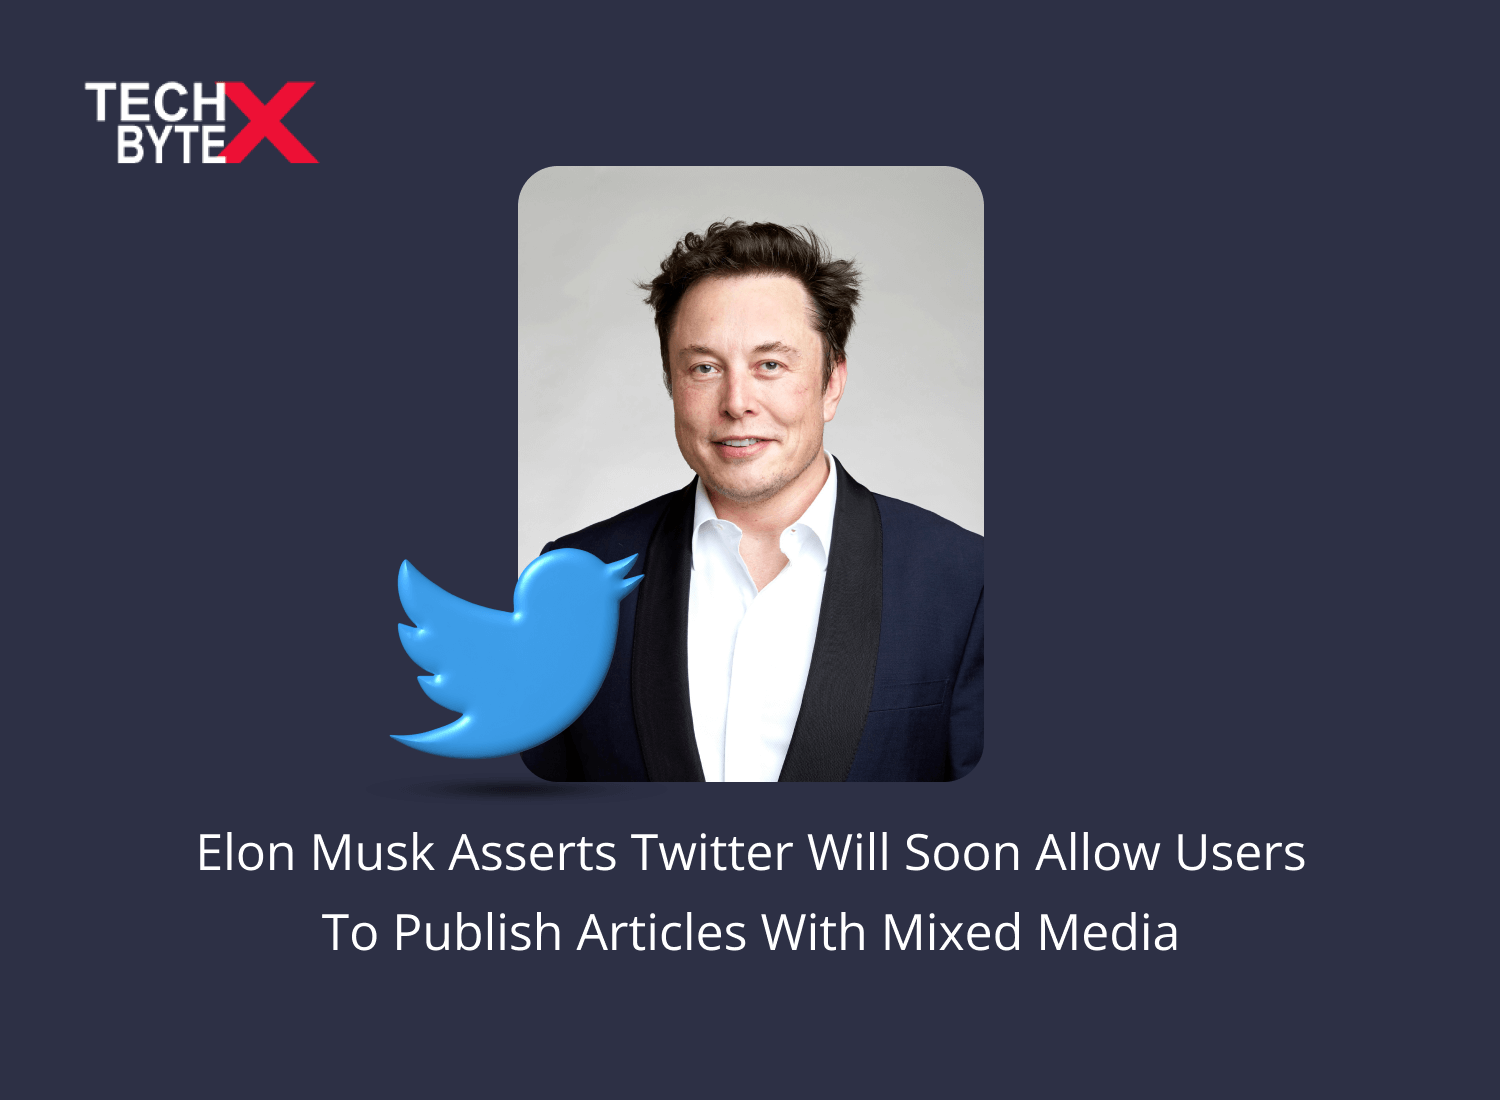 elon-musk-asserts-twitter-will-soon-allow-users-to-publish-articles-with-mixed-media